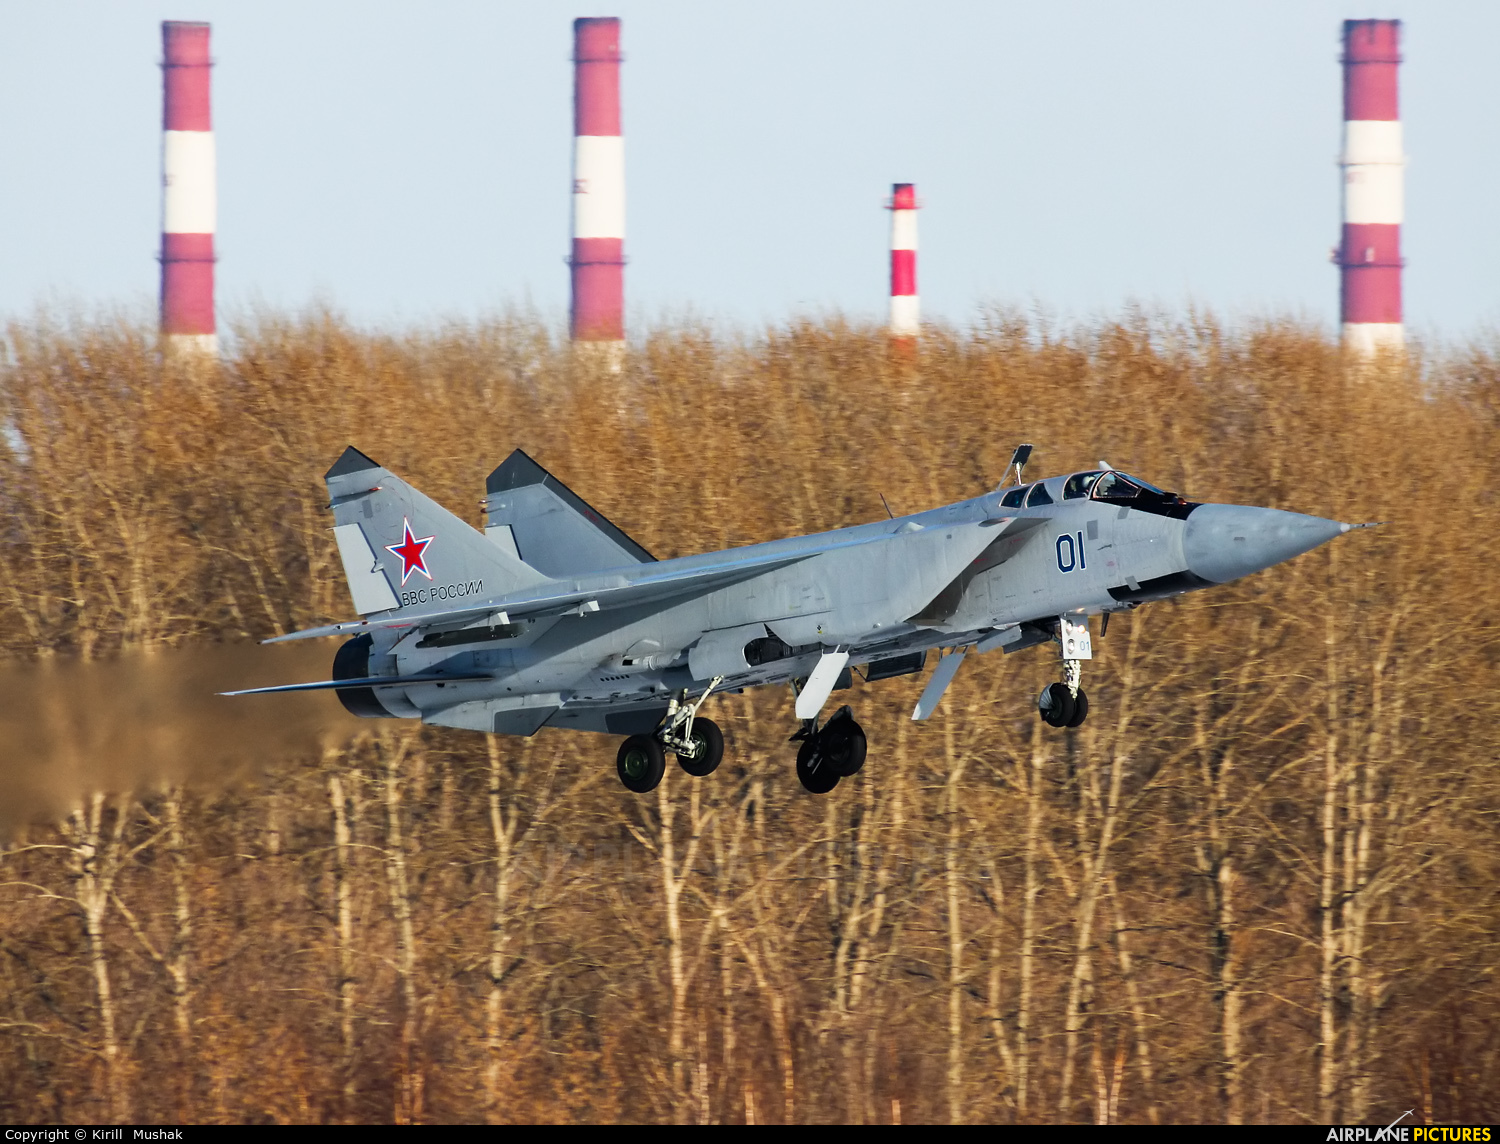 Russia - Air Force 01 aircraft at Undisclosed Location